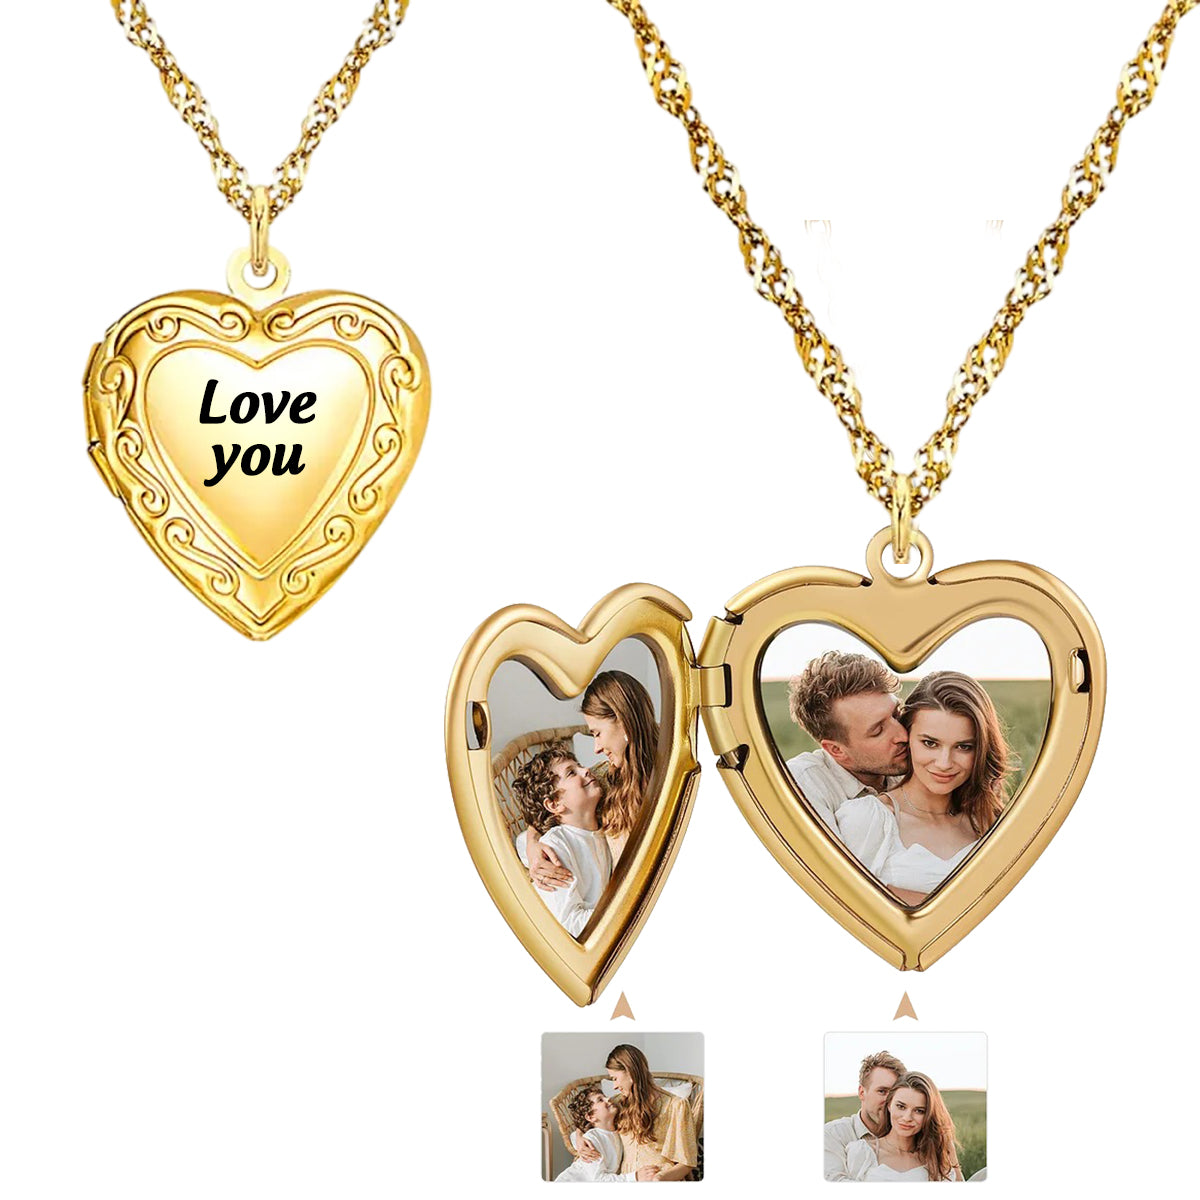 Personalized Photo Gold Vintage Heart Locket Necklace